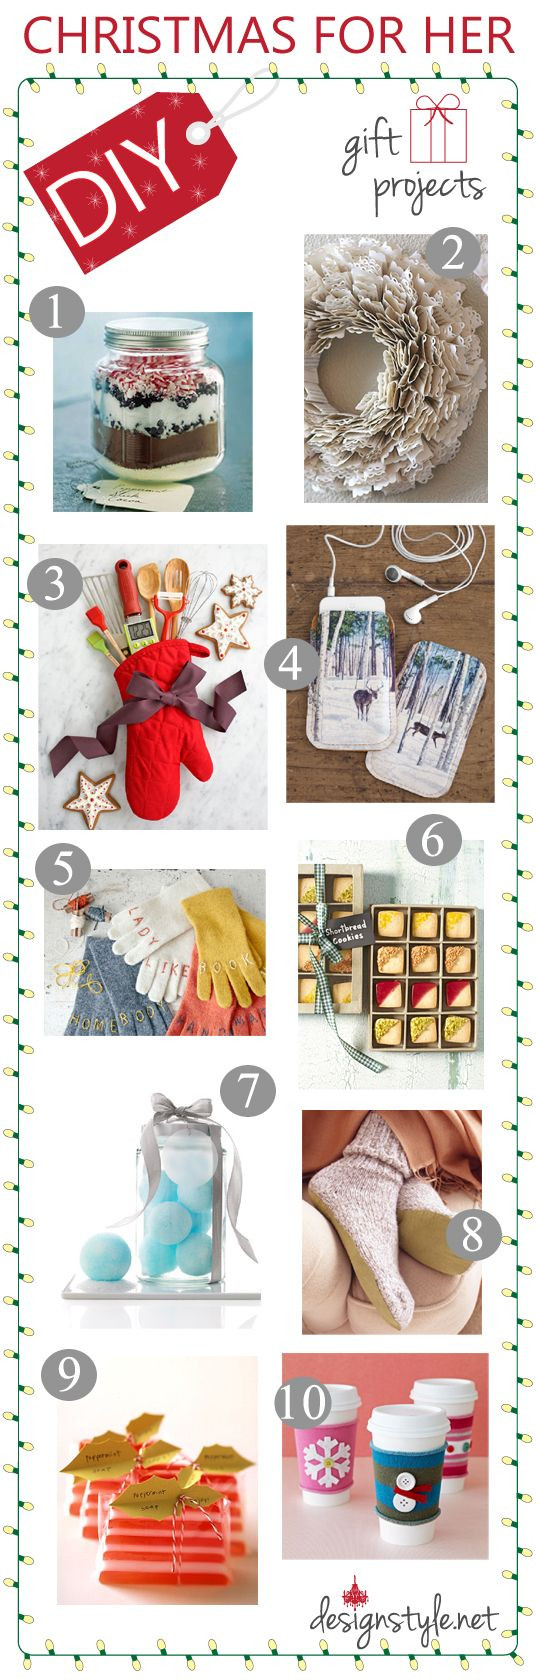 DIY Christmas Gifts For Her
 DIY Christmas Gift Ideas For Her & Him